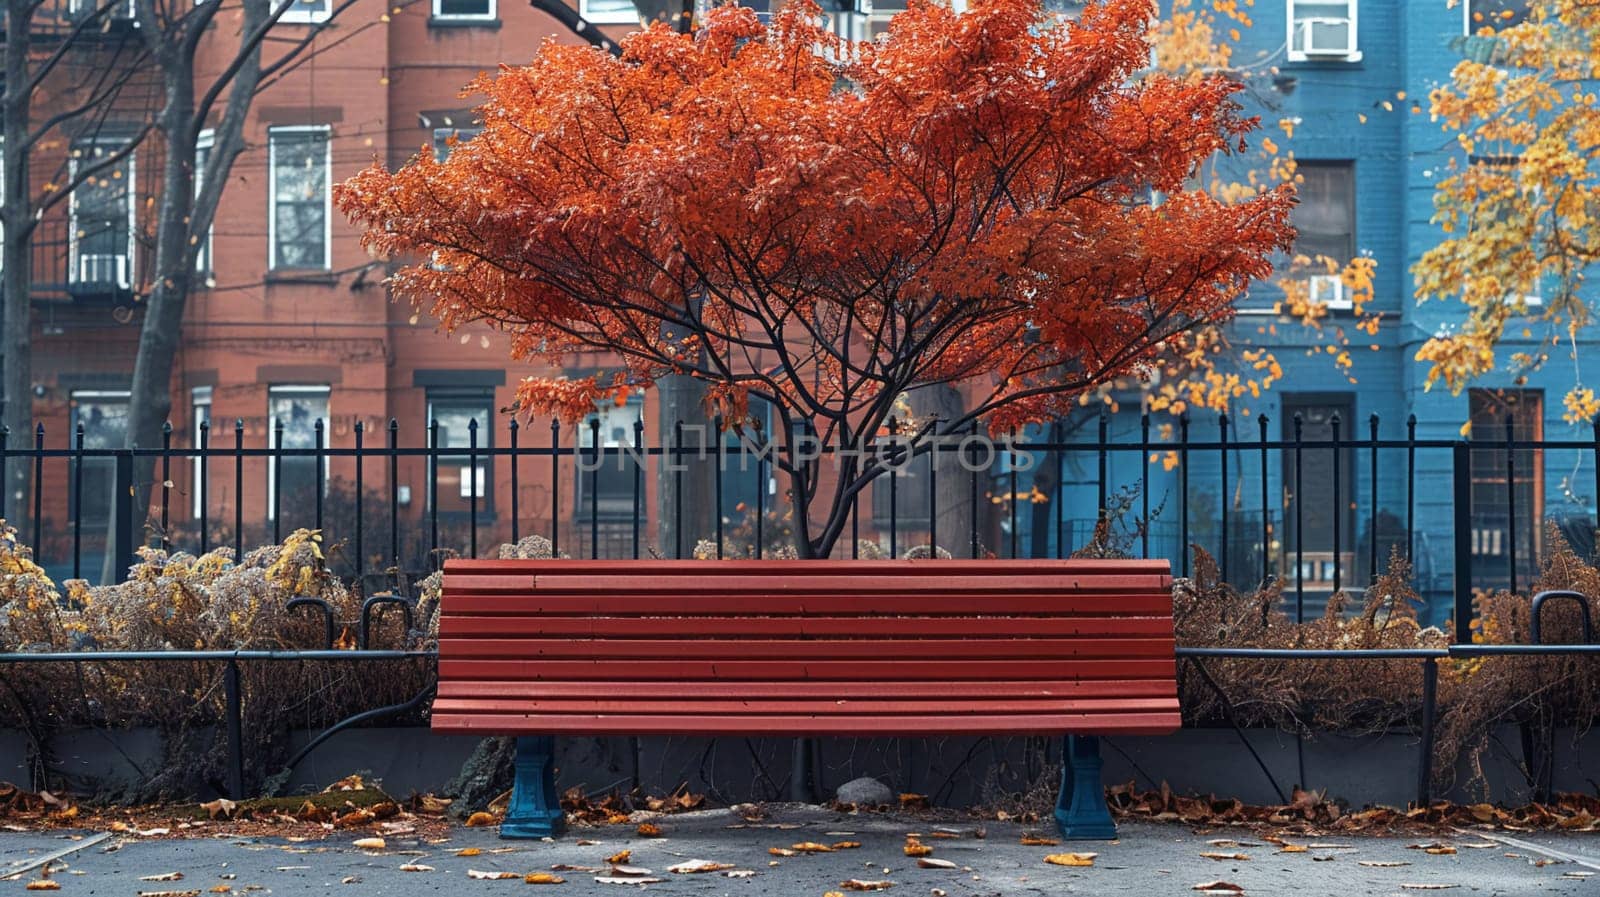 City bench moment depicted in minimalistic style by Benzoix